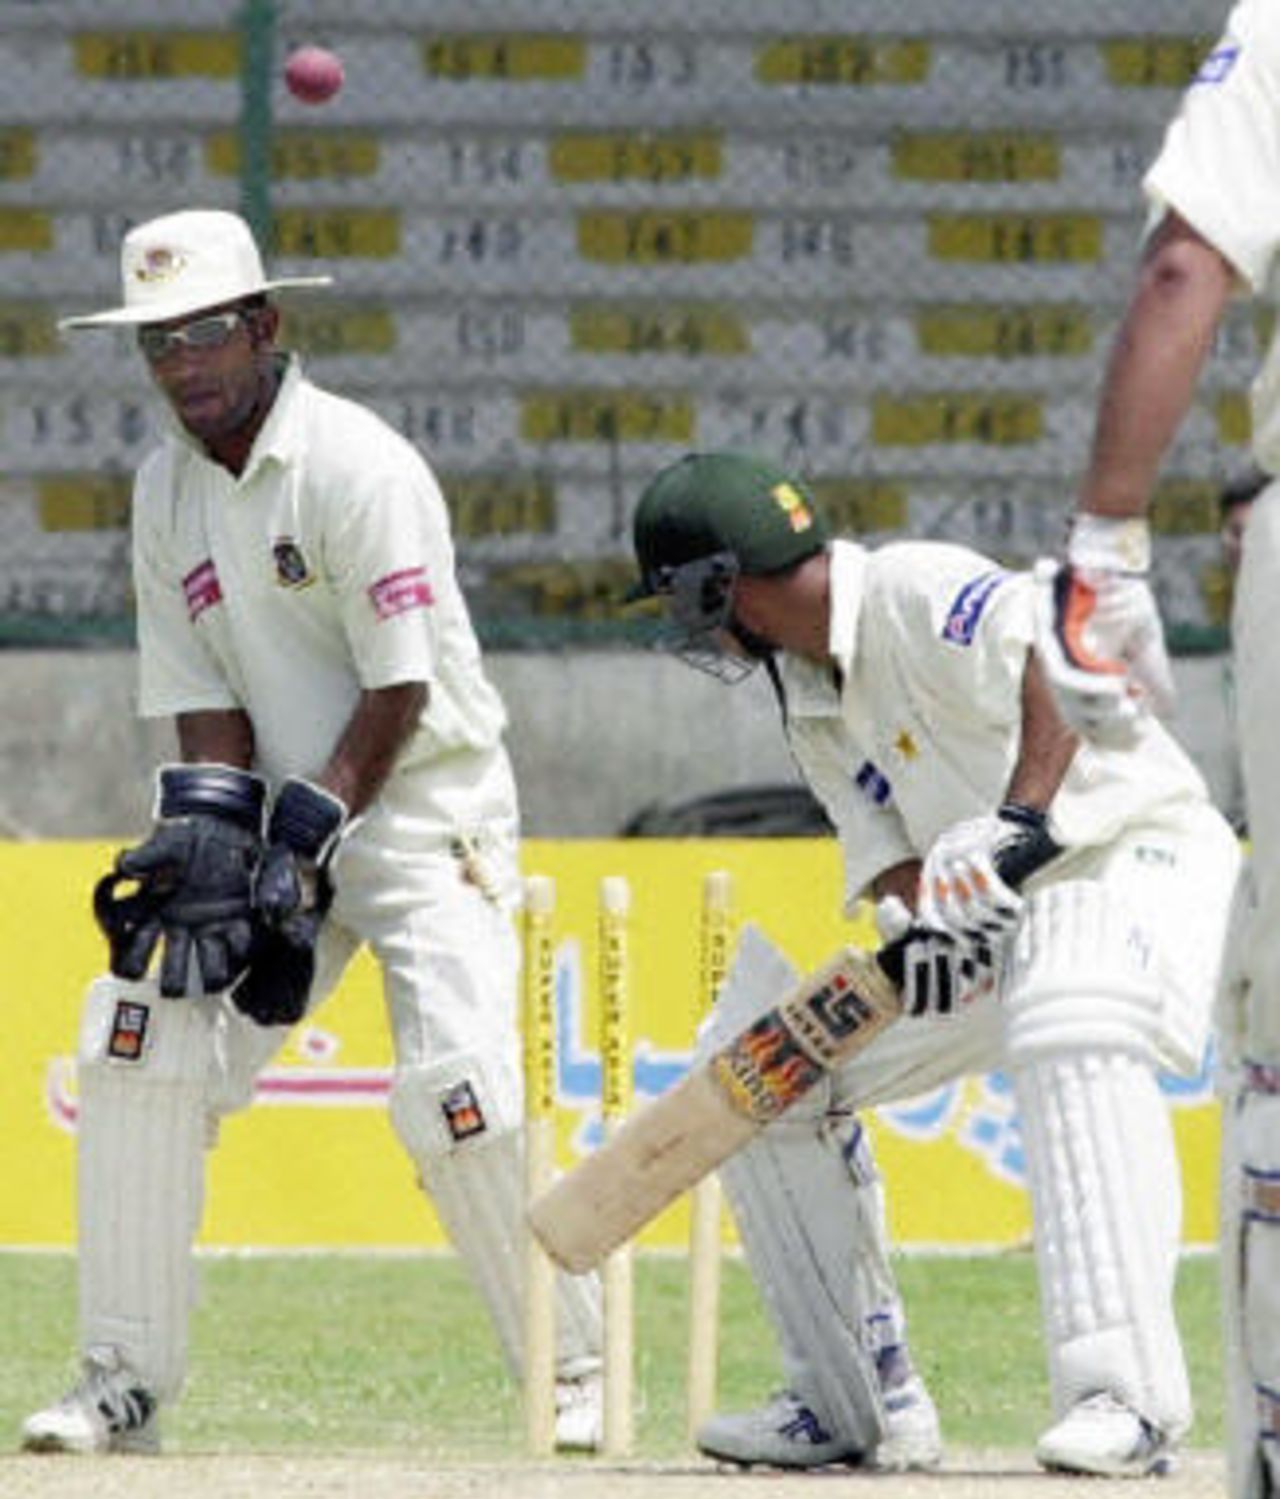 Yasir Hameed (C) is bowled as Khaled Mashud (L) looks on after hitting 105 on the last day play of the first Test match between Pakistan and Bangladesh in Karachi, 24 August 2003.